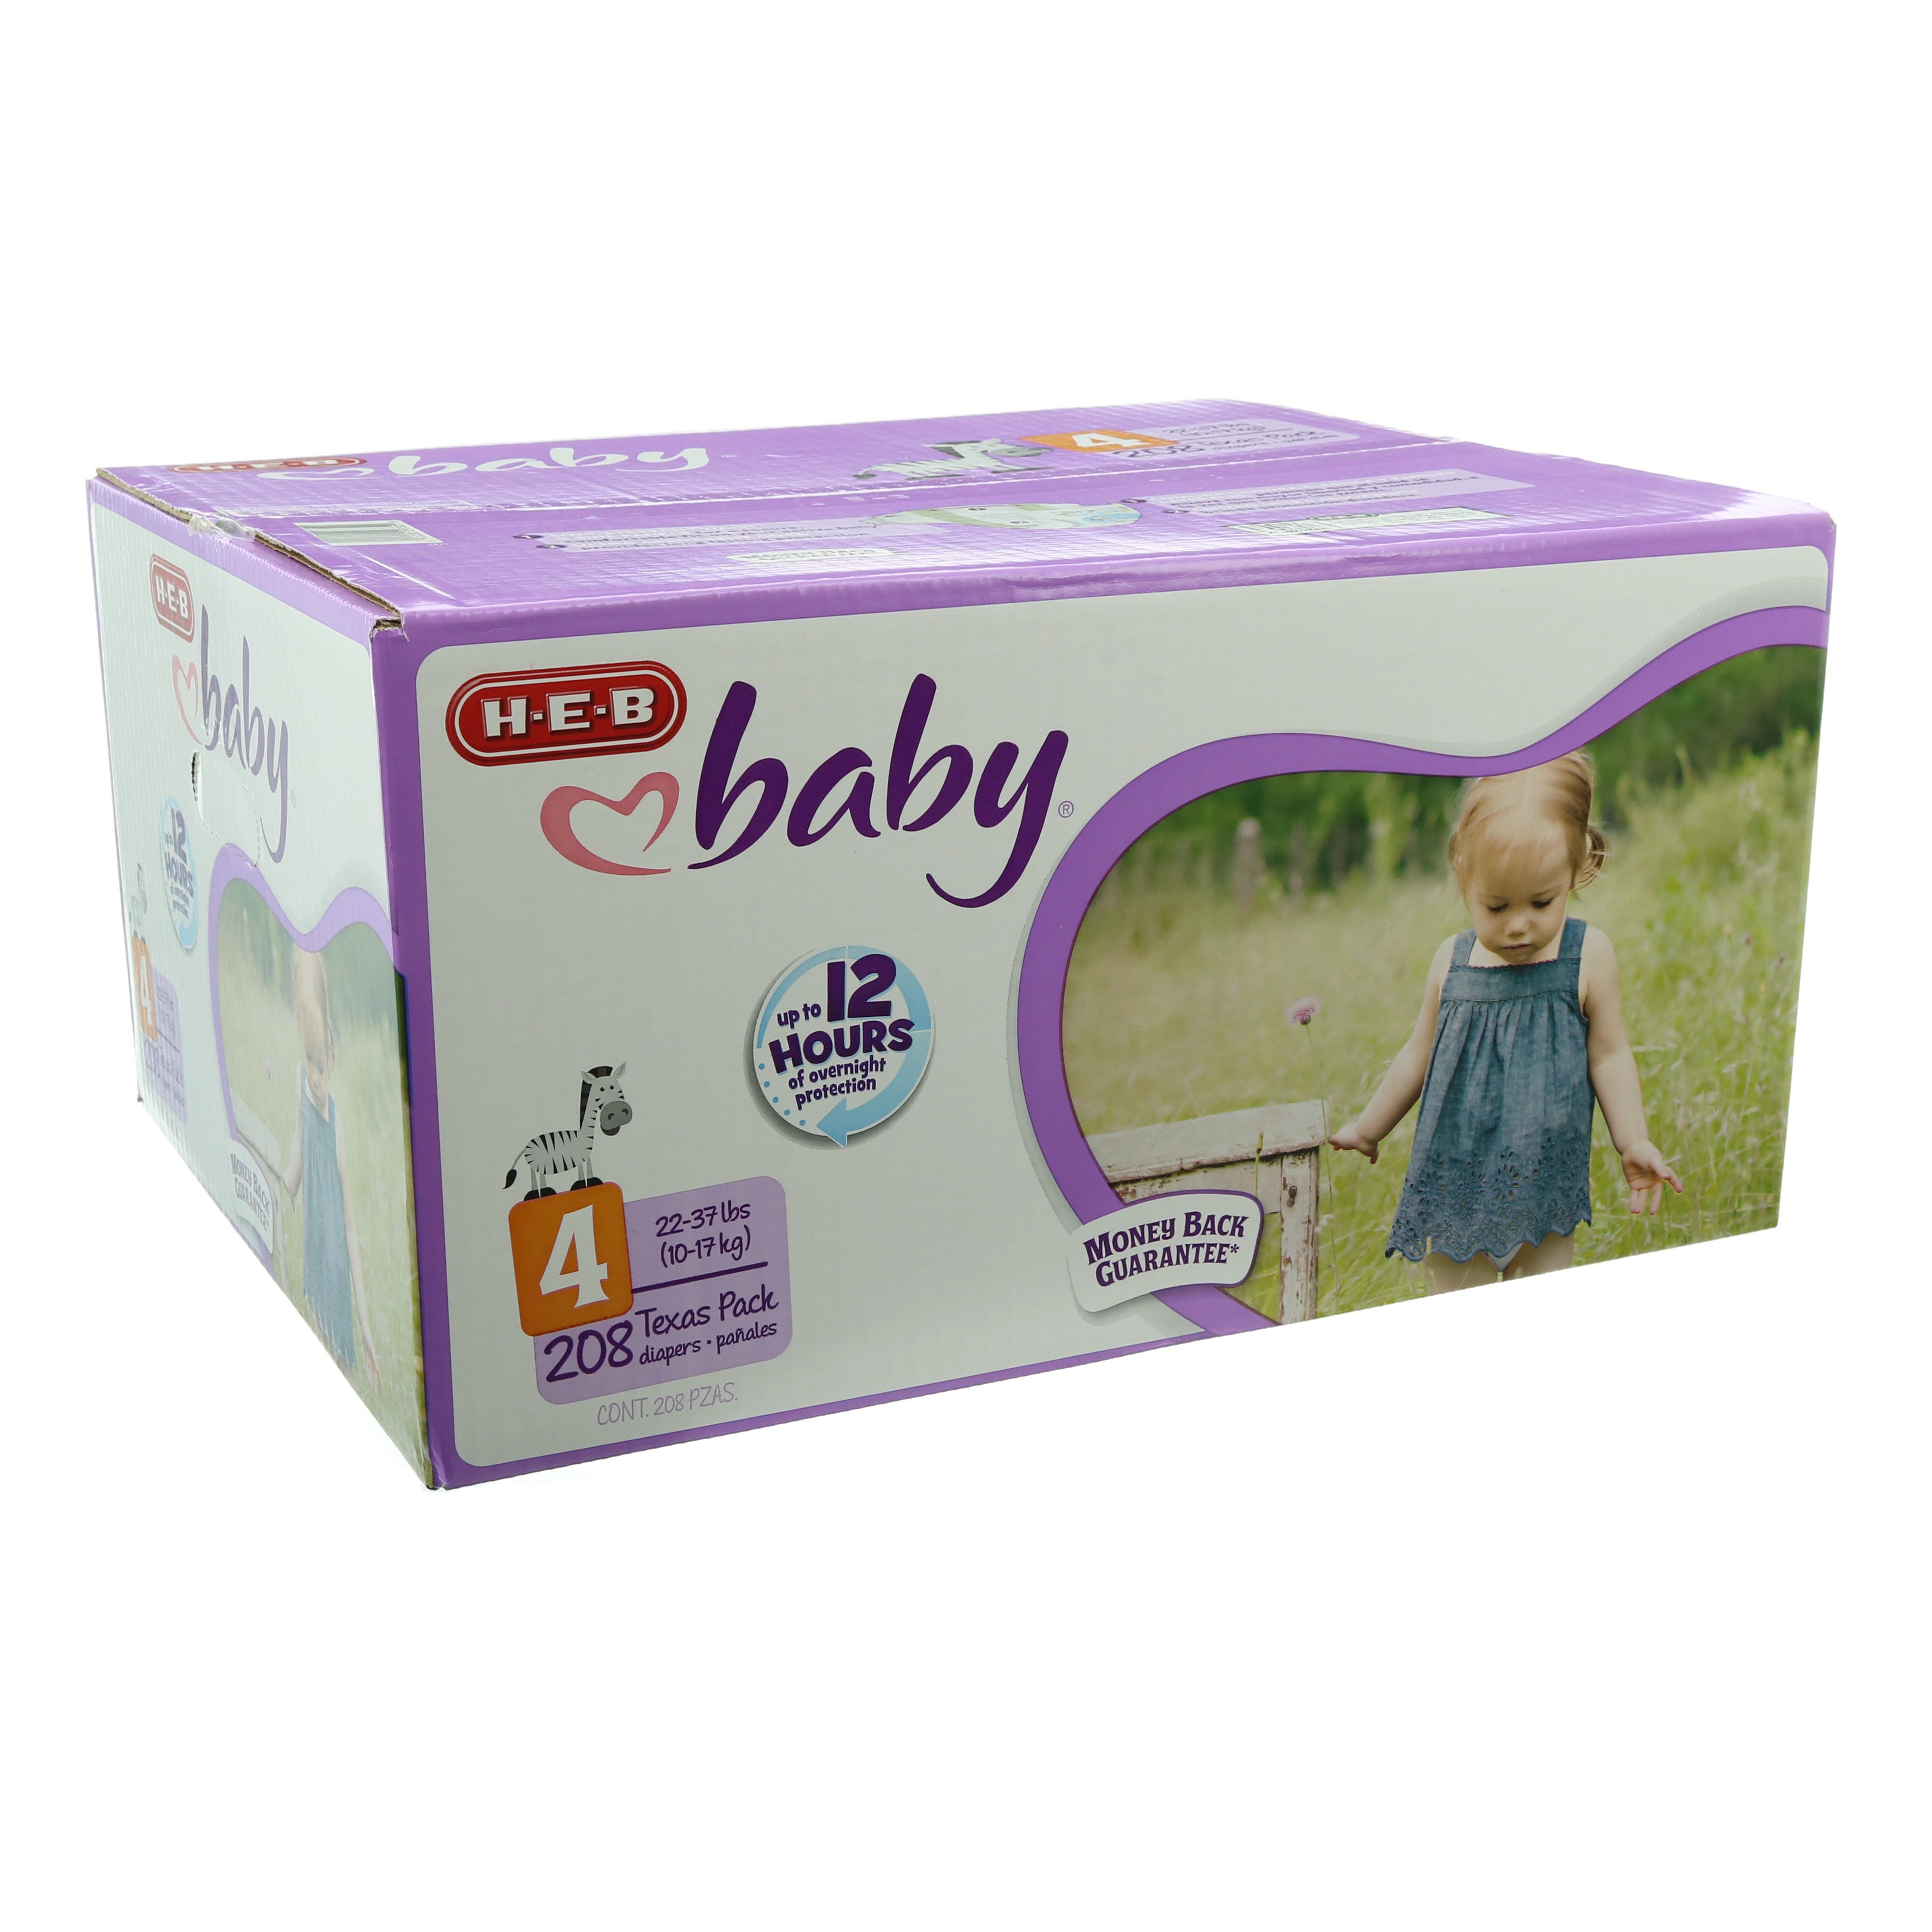 H-E-B Baby Texas-Size Pack Diapers - Size 5 - Shop Diapers at H-E-B